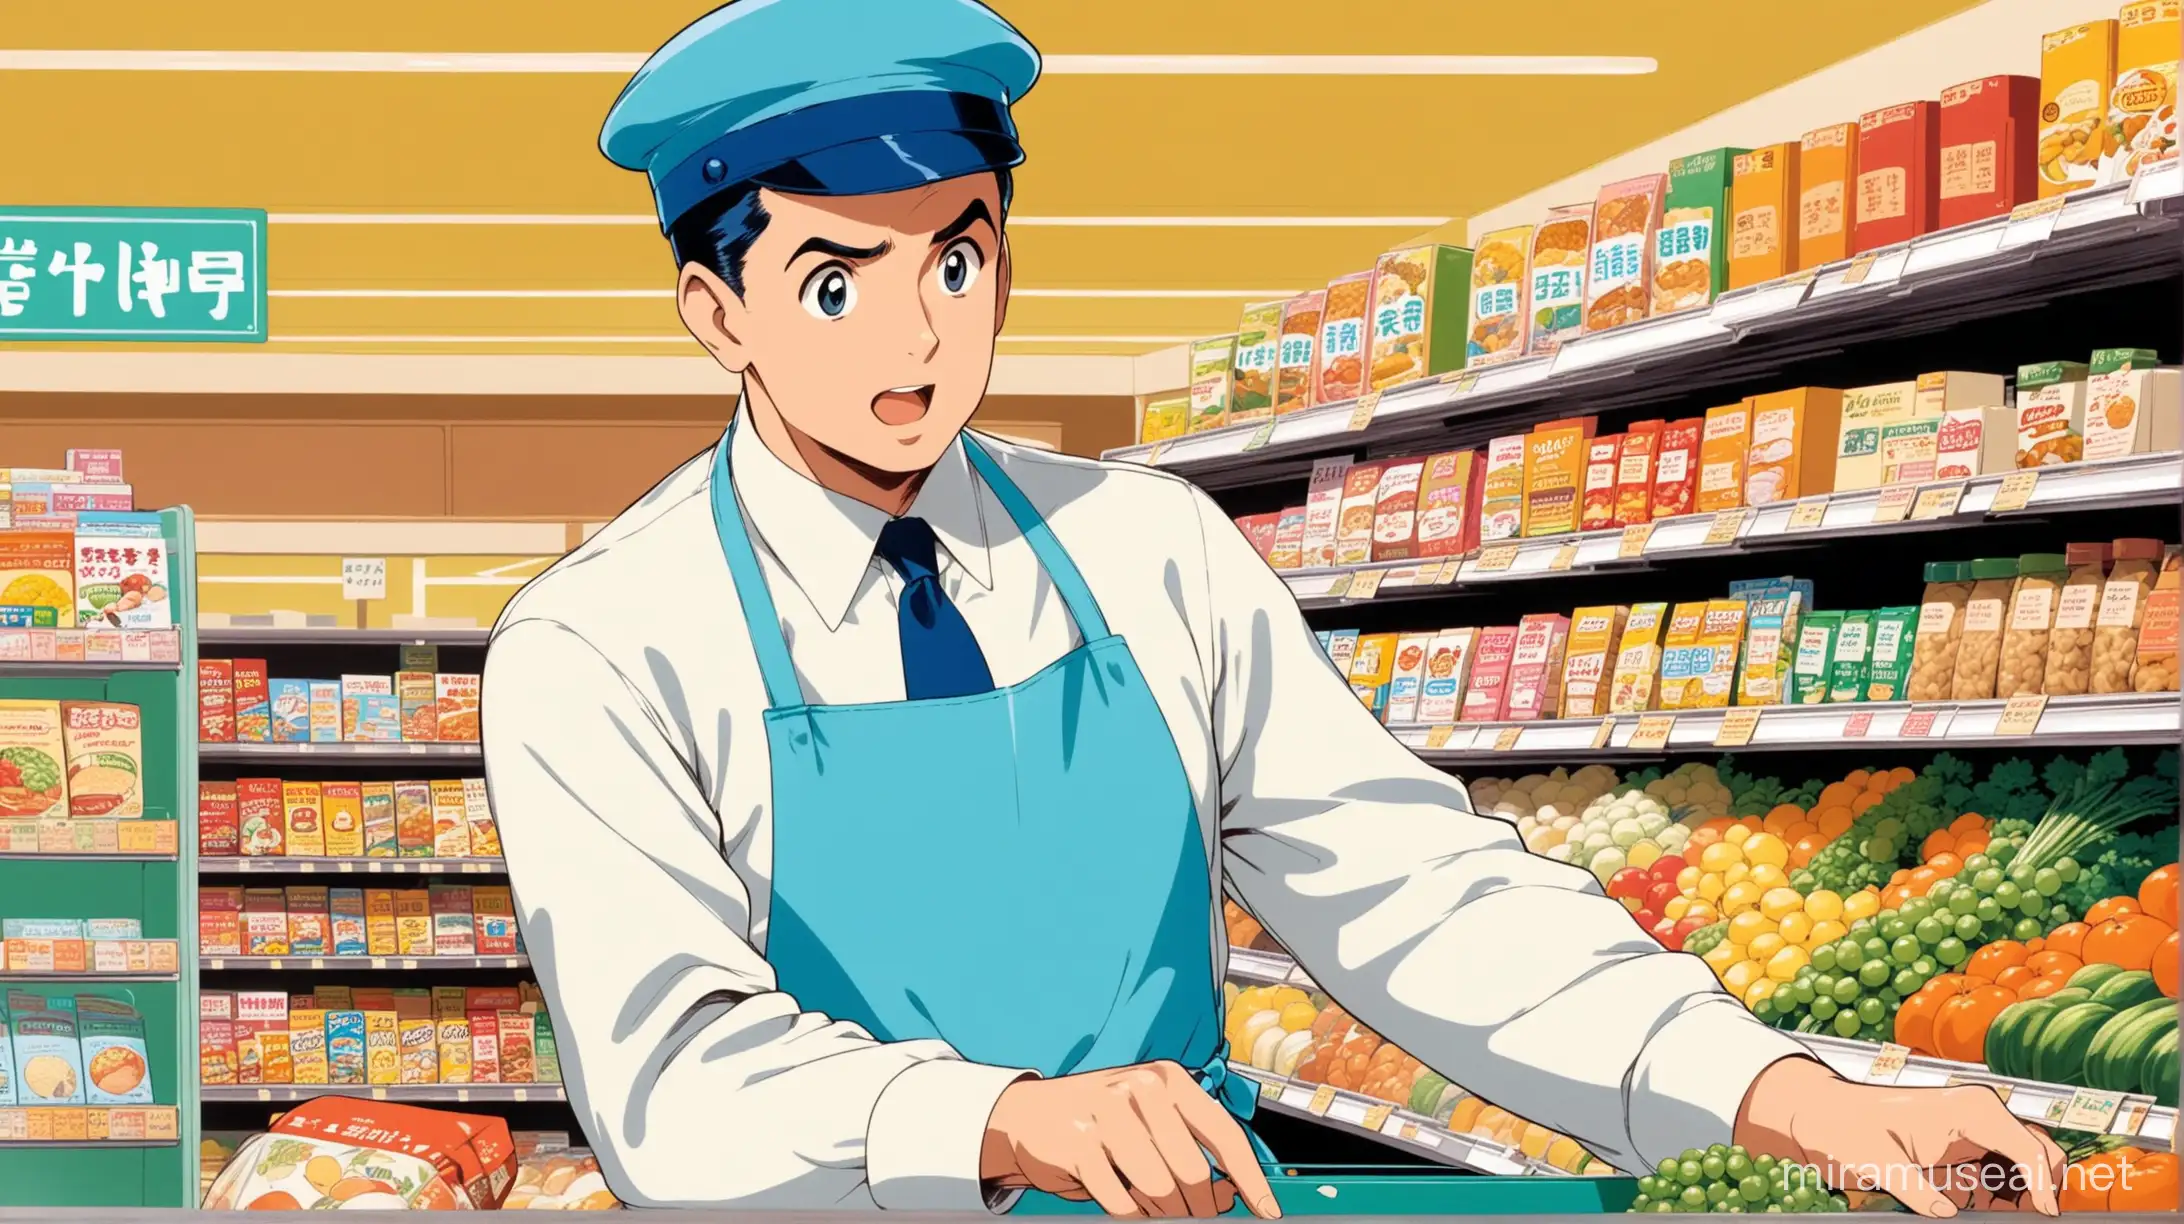 1950s Grocery Store English Lesson with Vintage Anime Clerk